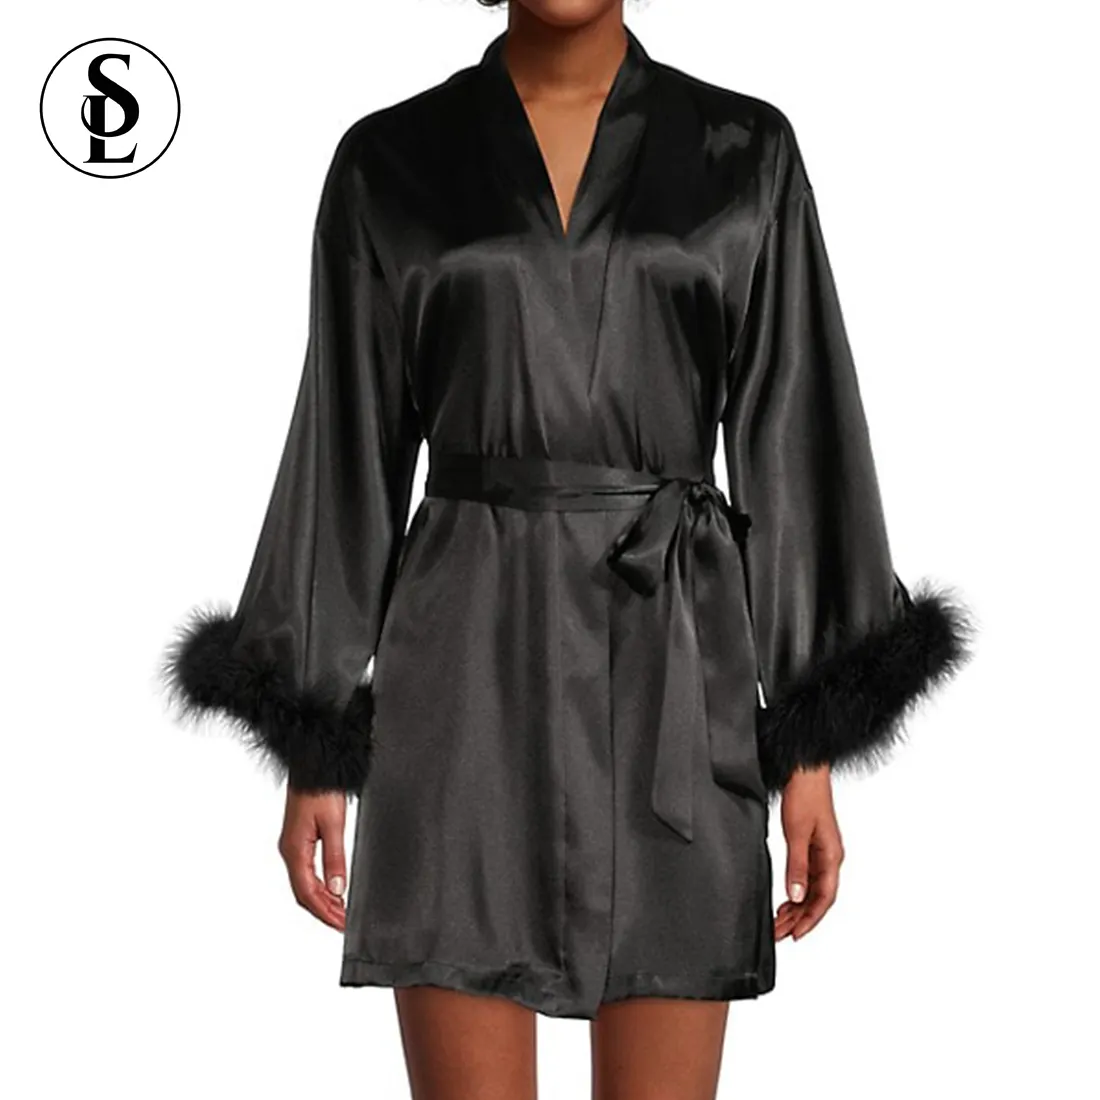 Women Luxury Bridal Feather Robes Faux Fur Trim Party Belted Satin Bridesmaid Robe